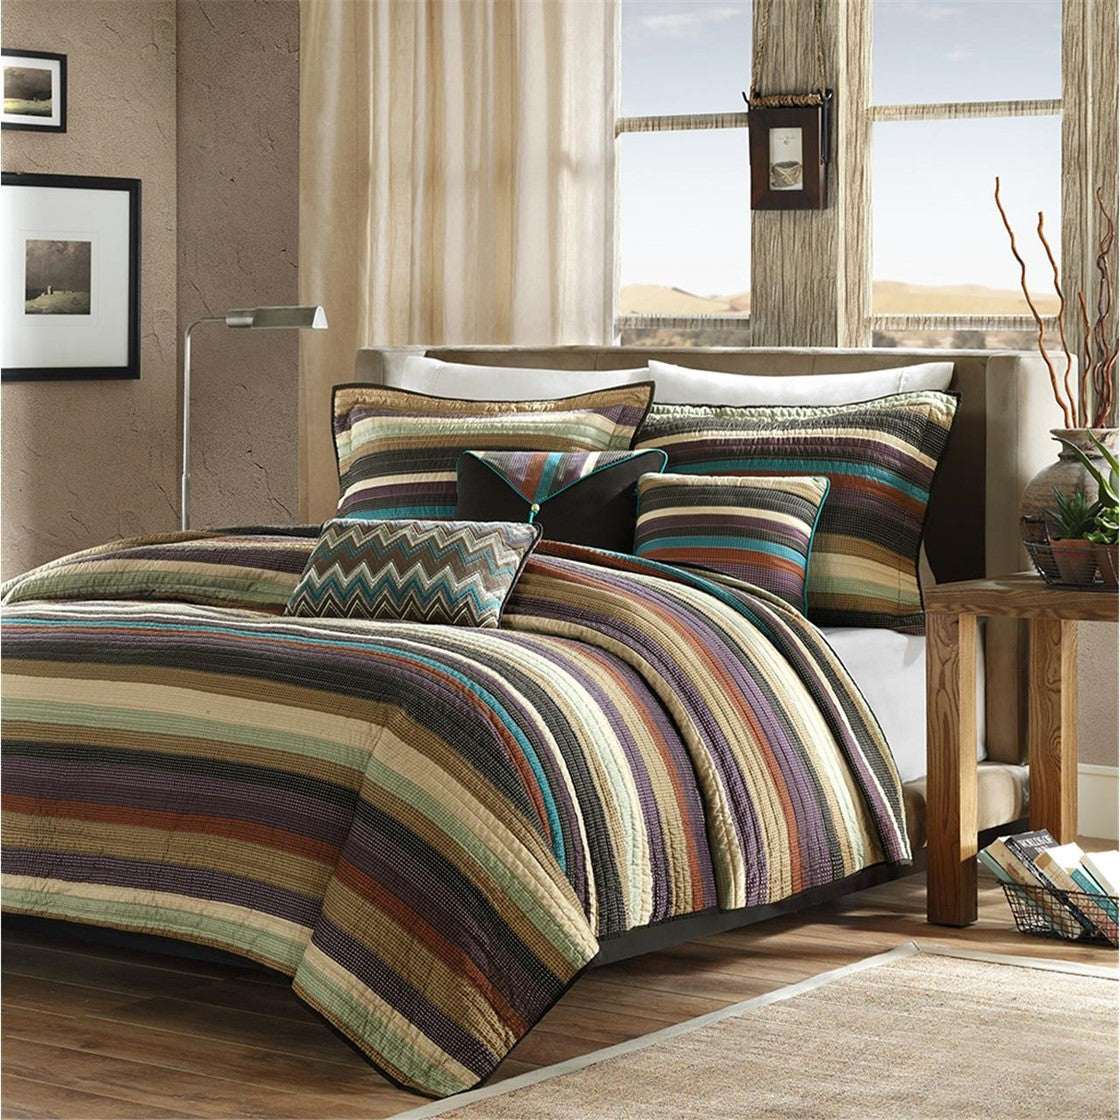 Madison Park Yosemite Reversible Quilt Set with Throw Pillows - Multicolor - Twin Size / Twin XL Size